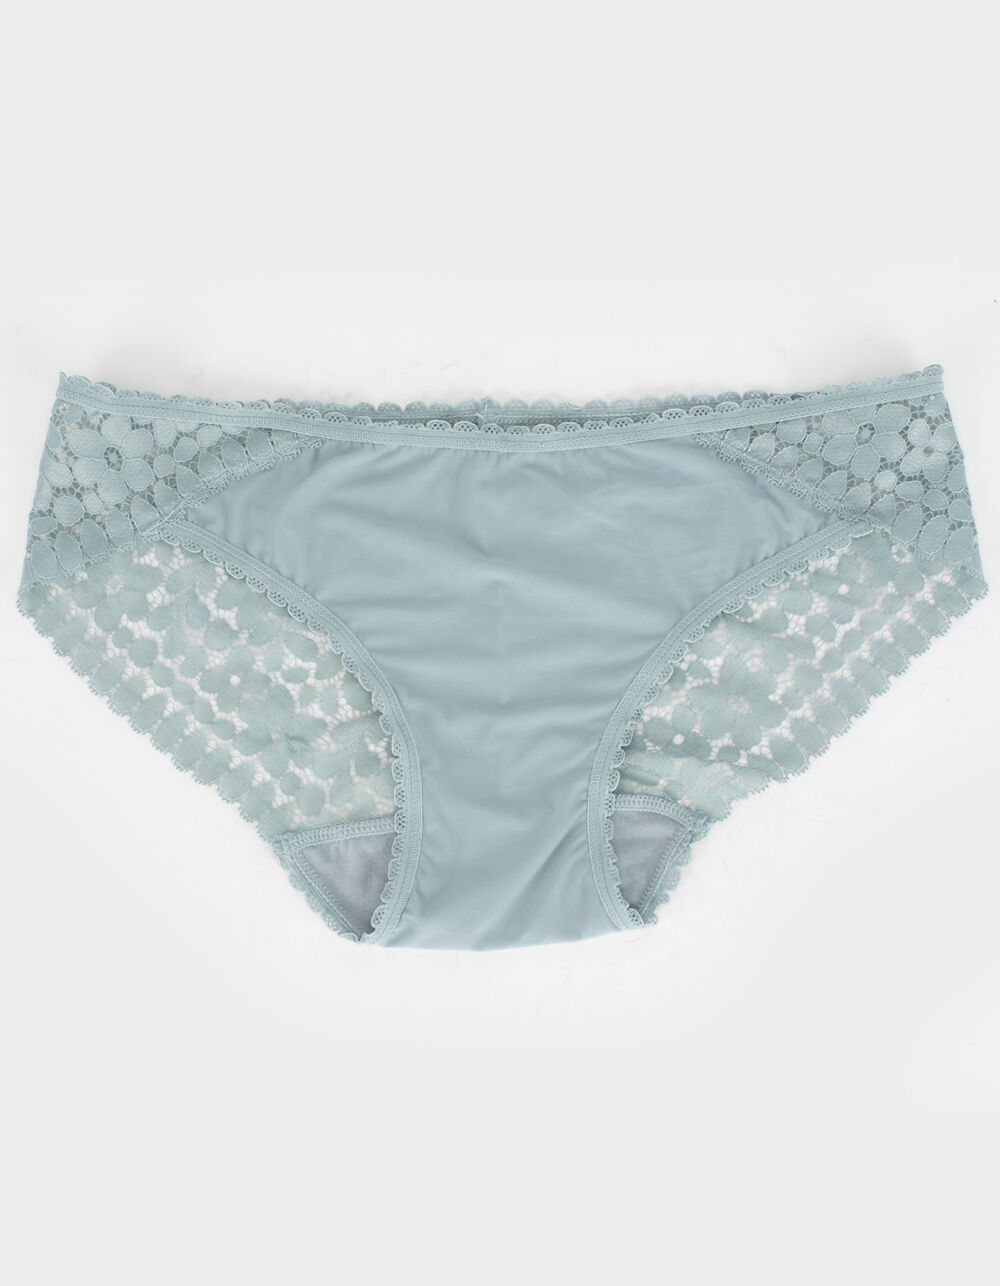 nwot Bebe Sexy Dusty Blue Sheer Floral Lace Cheeky Boyshorts